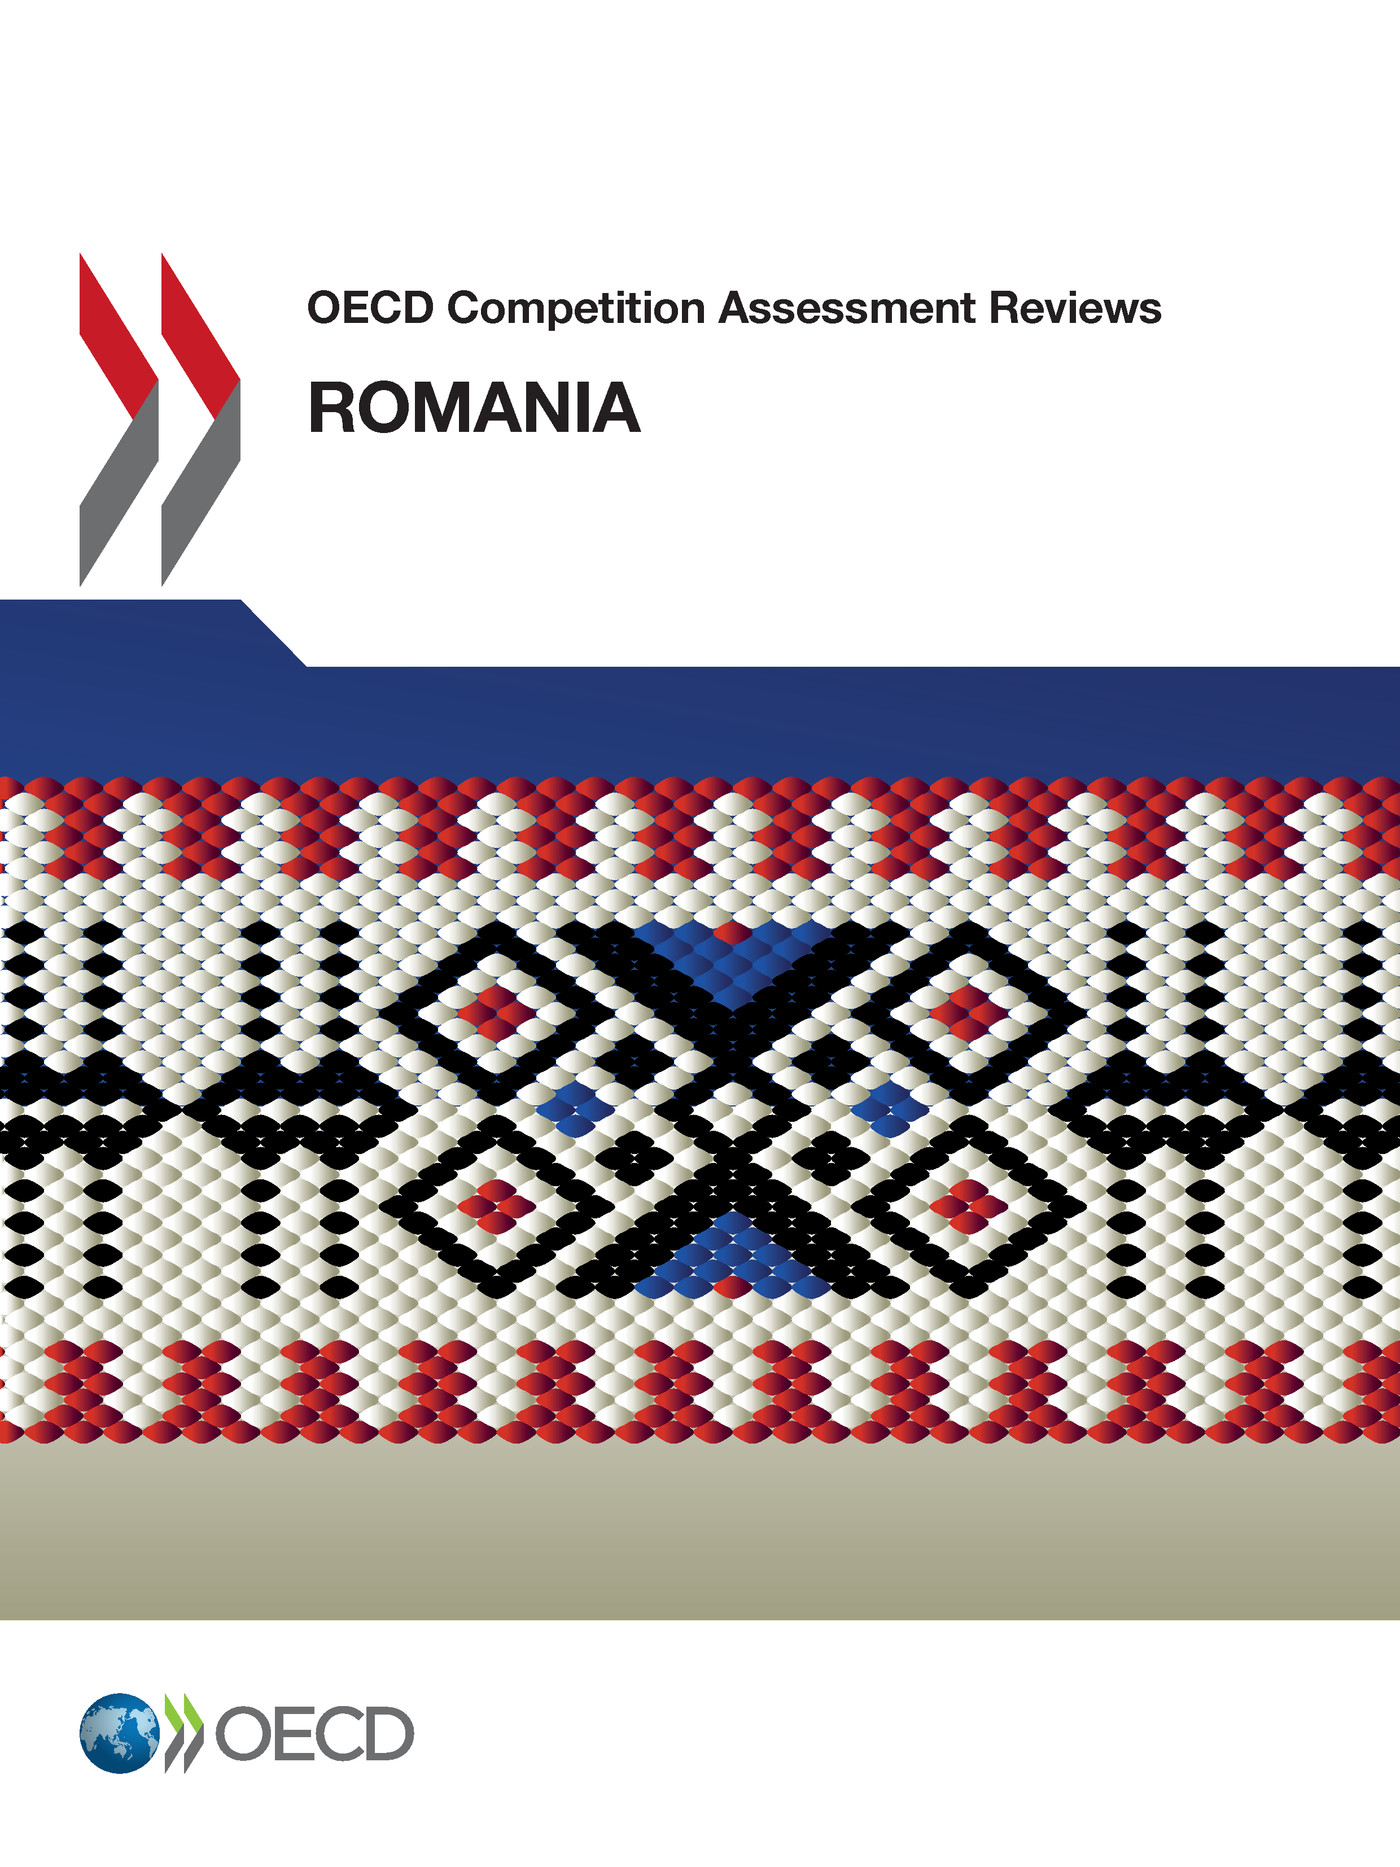 OECD Competition Assessment Reviews: Romania -  Collectif - OCDE / OECD